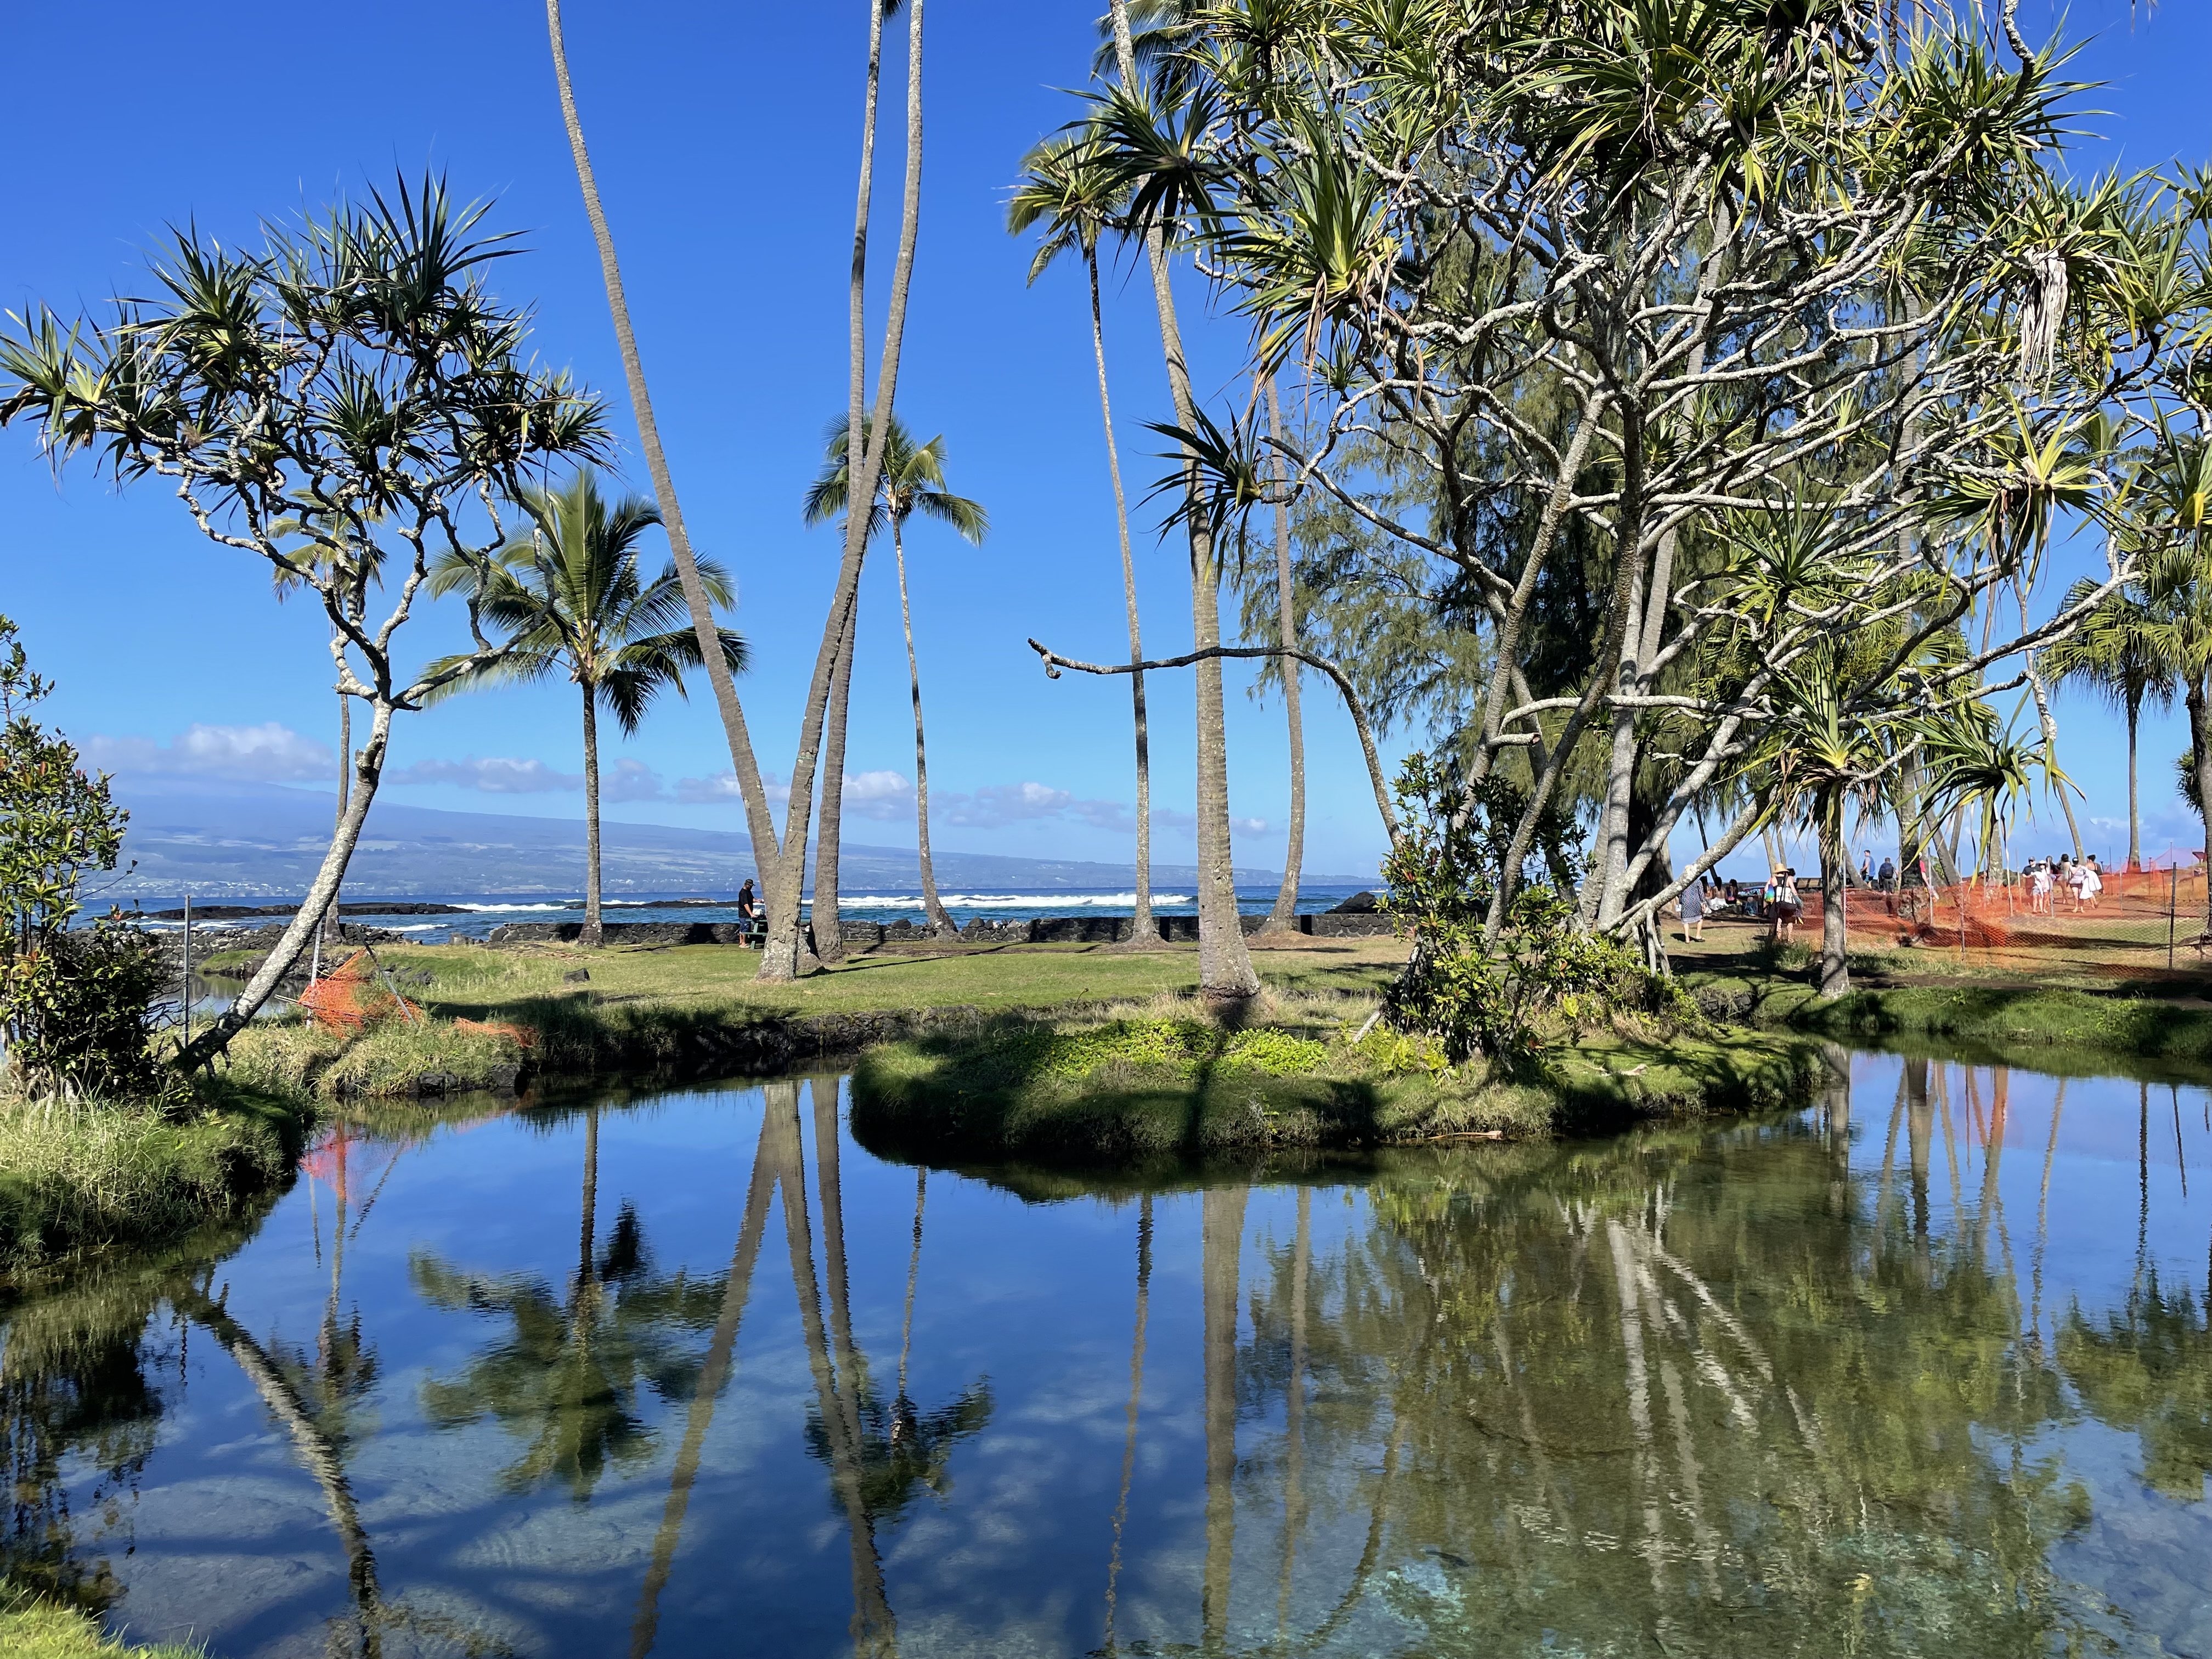 View on the Hilo side